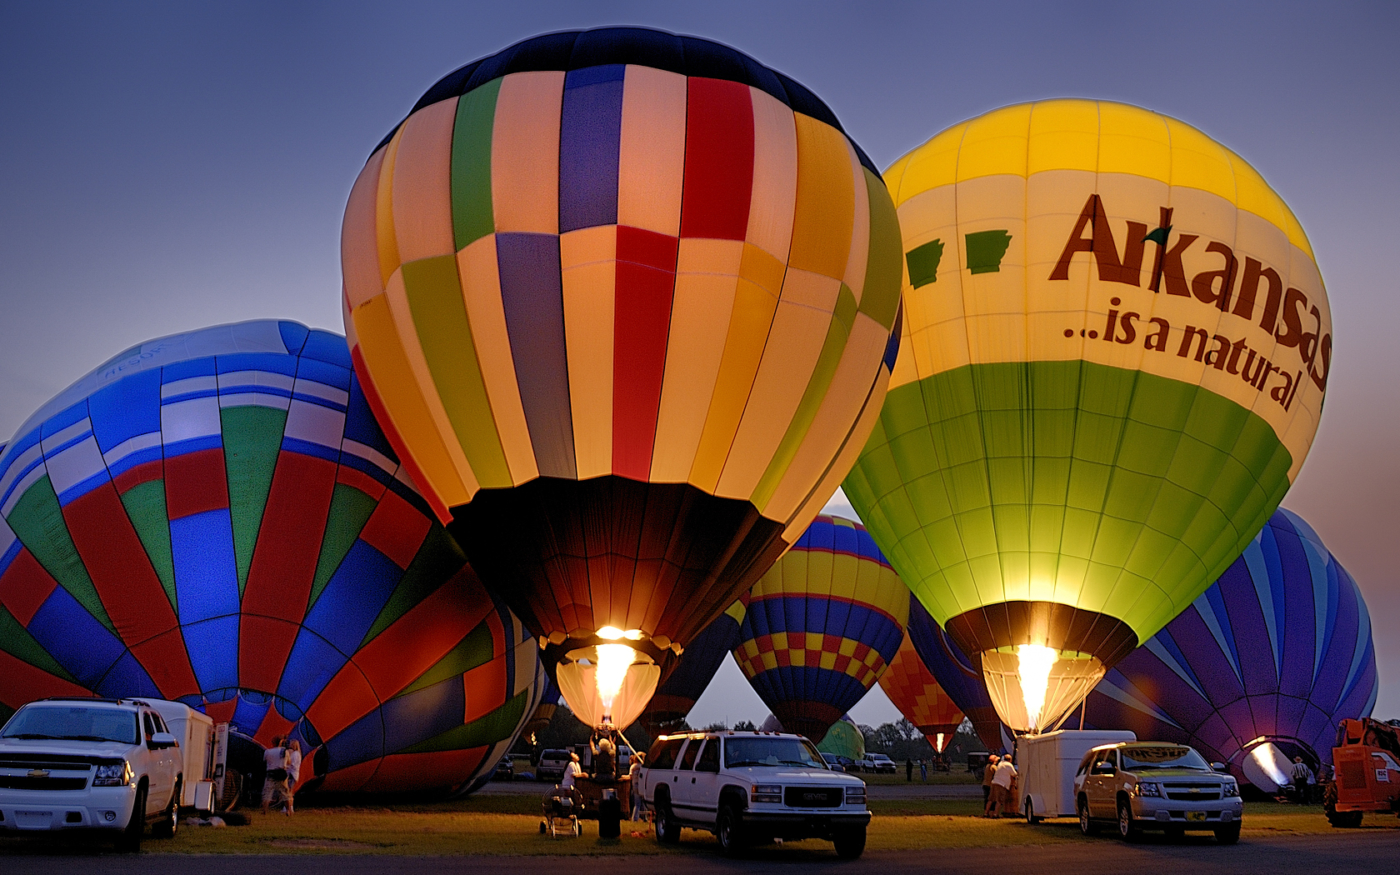 Hot air balloons being inflated at sunset in Hot Springs, Arkansas.